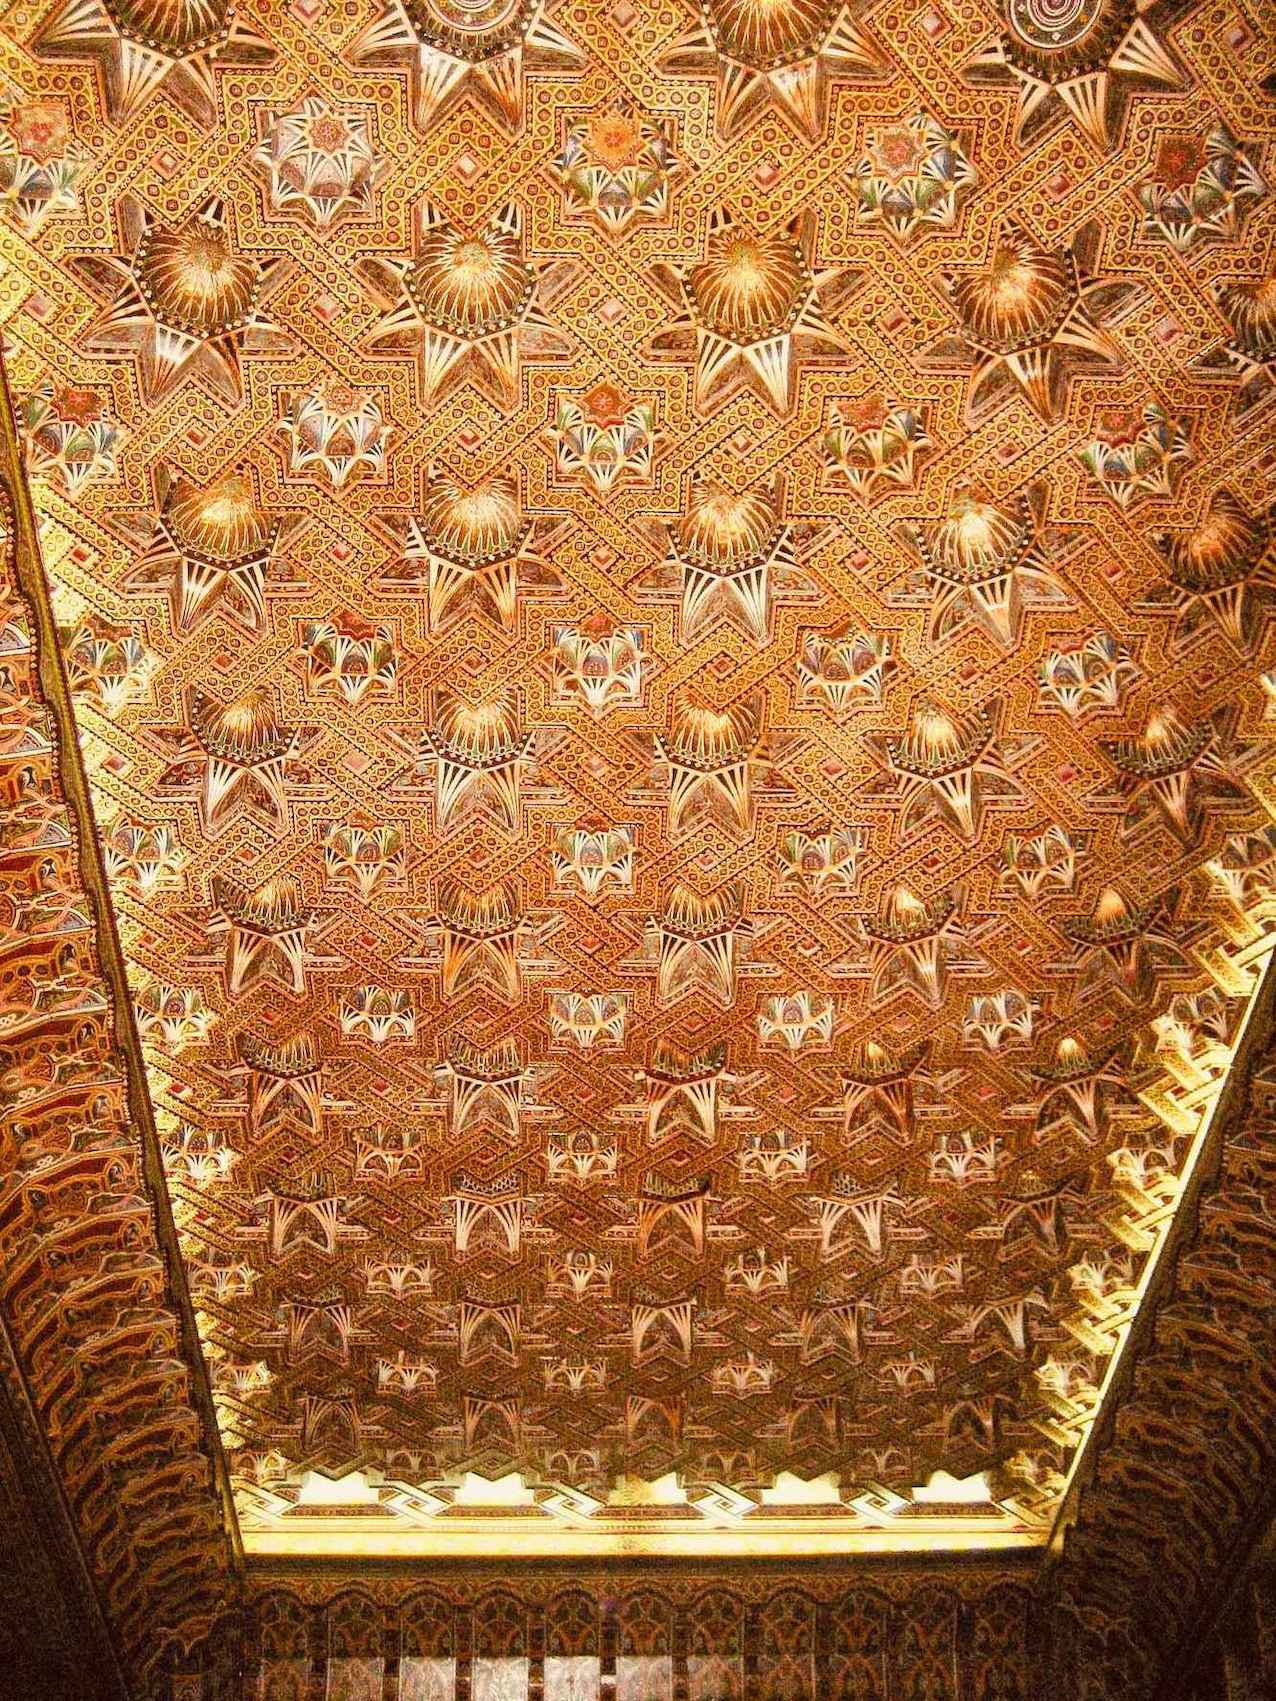 The painted wooden ceiling at Hassan II Mosque